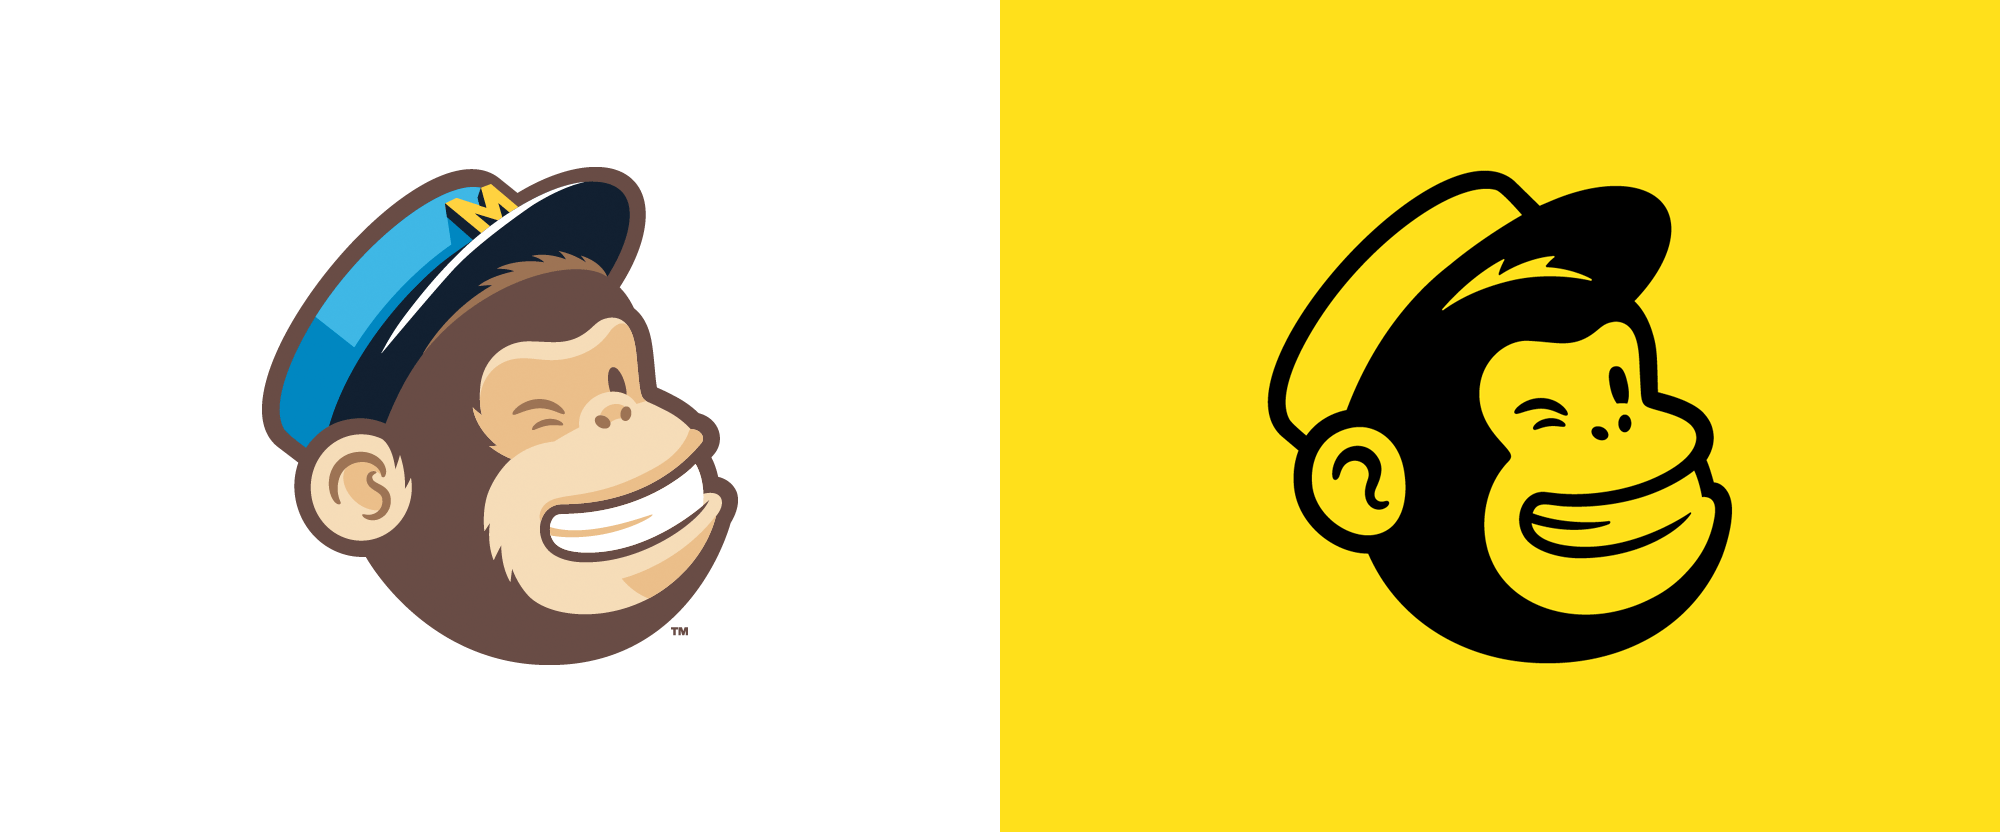 MailChimp Logo - Brand New: New Logo And Identity For Mailchimp By COLLINS And In House